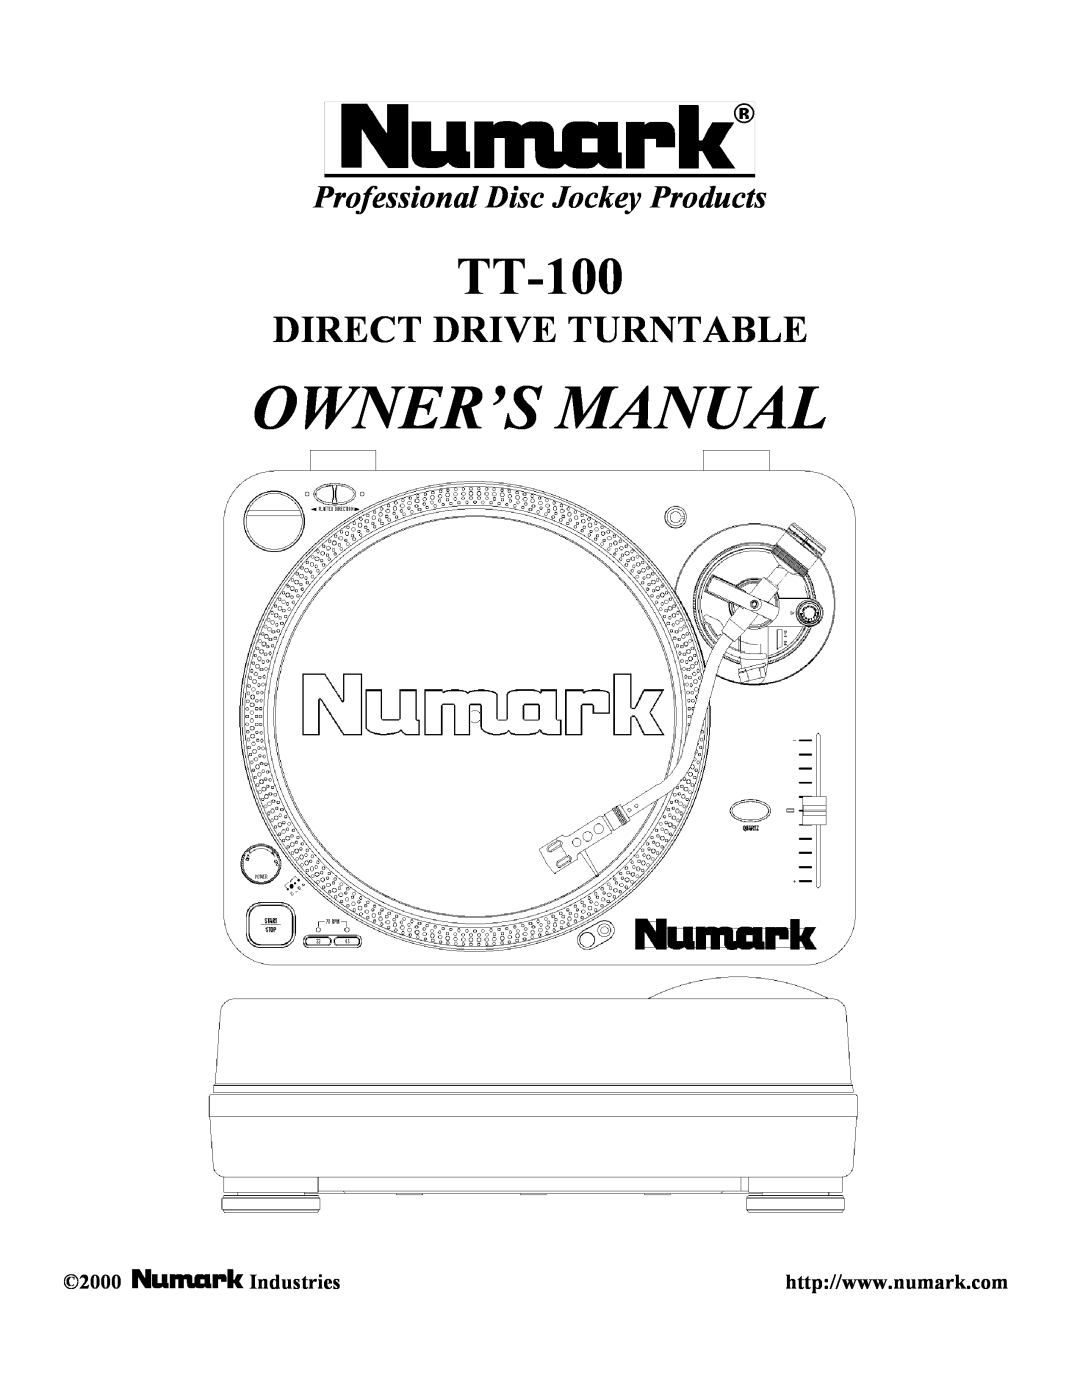 Numark Industries TT-100 owner manual Professional Disc Jockey Products, Direct Drive Turntable, 2000Industries 